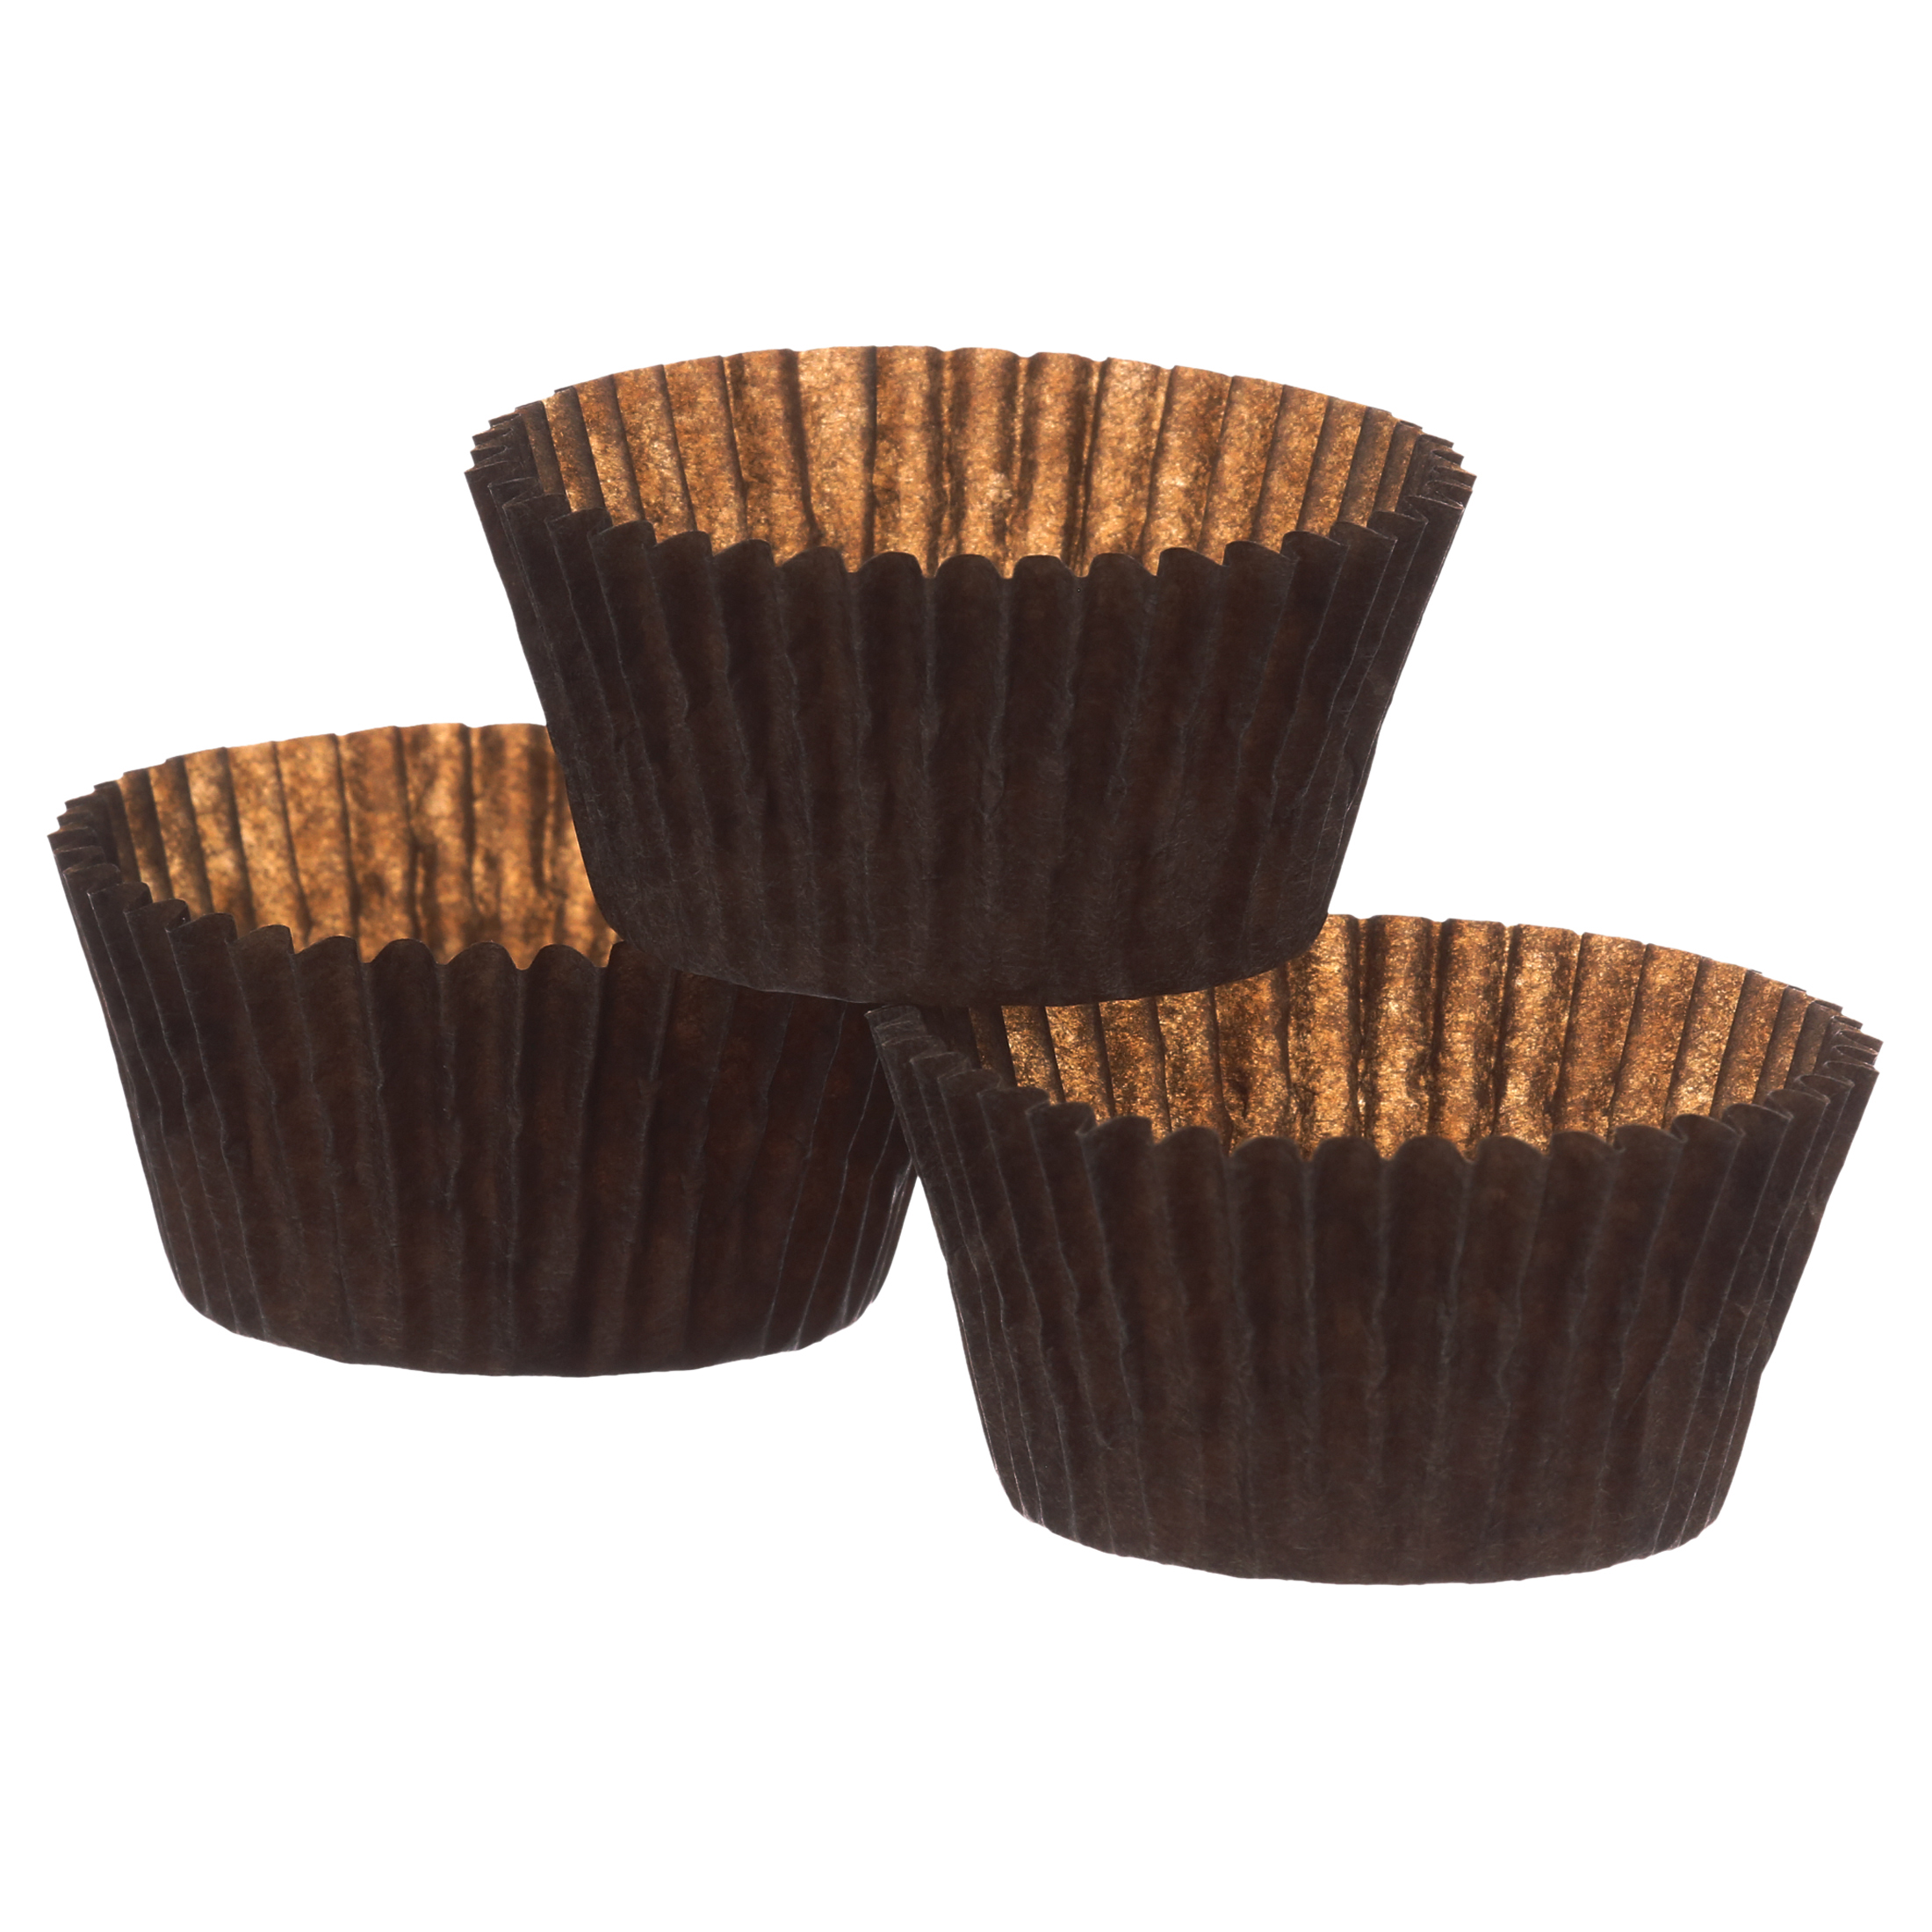 DECONY Brown jumbo Cupcake muffin baking cup Liners MADE IN USA appx. 500  pc. – Decony